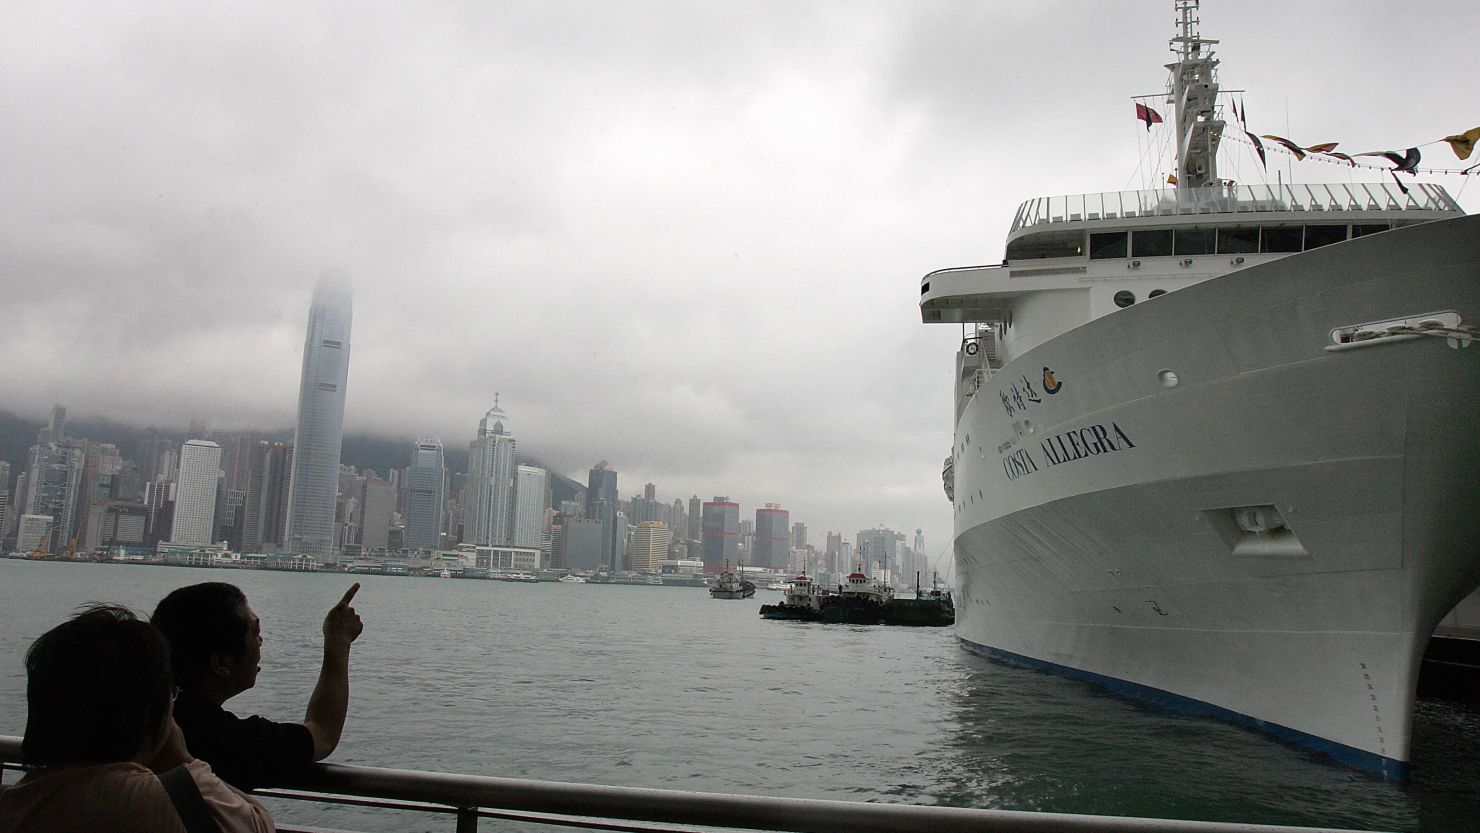 The Costa Allegra berthed in Hong Kong prior to its maiden voyage to Mumbai, India on May 29, 2006.